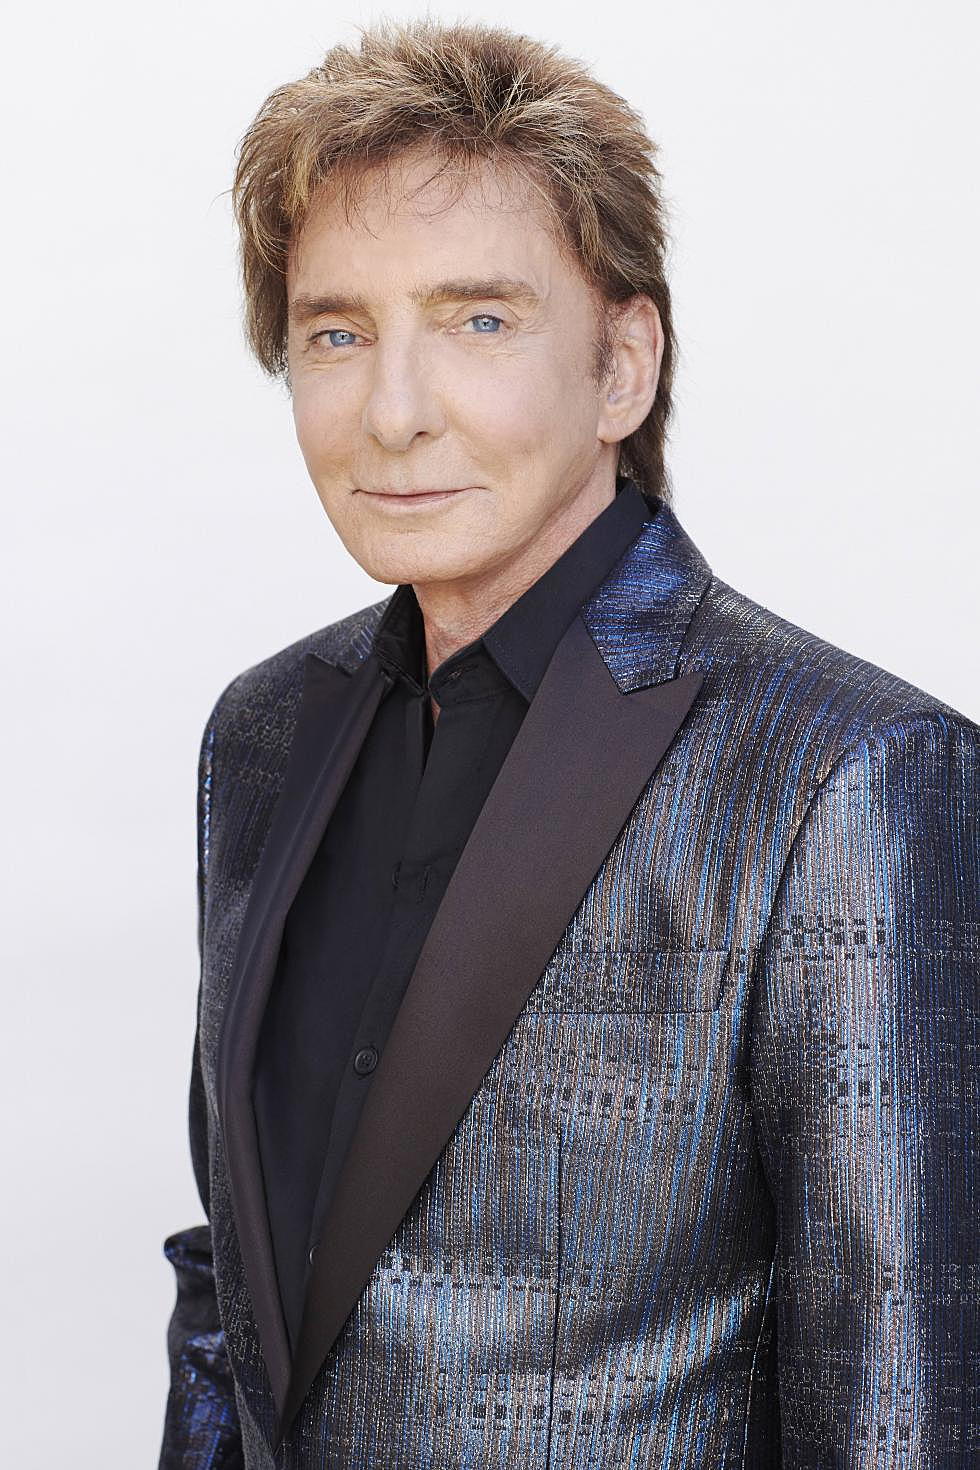 Cory And Elizabeth Interview The Legendary Barry Manilow [AUDIO]